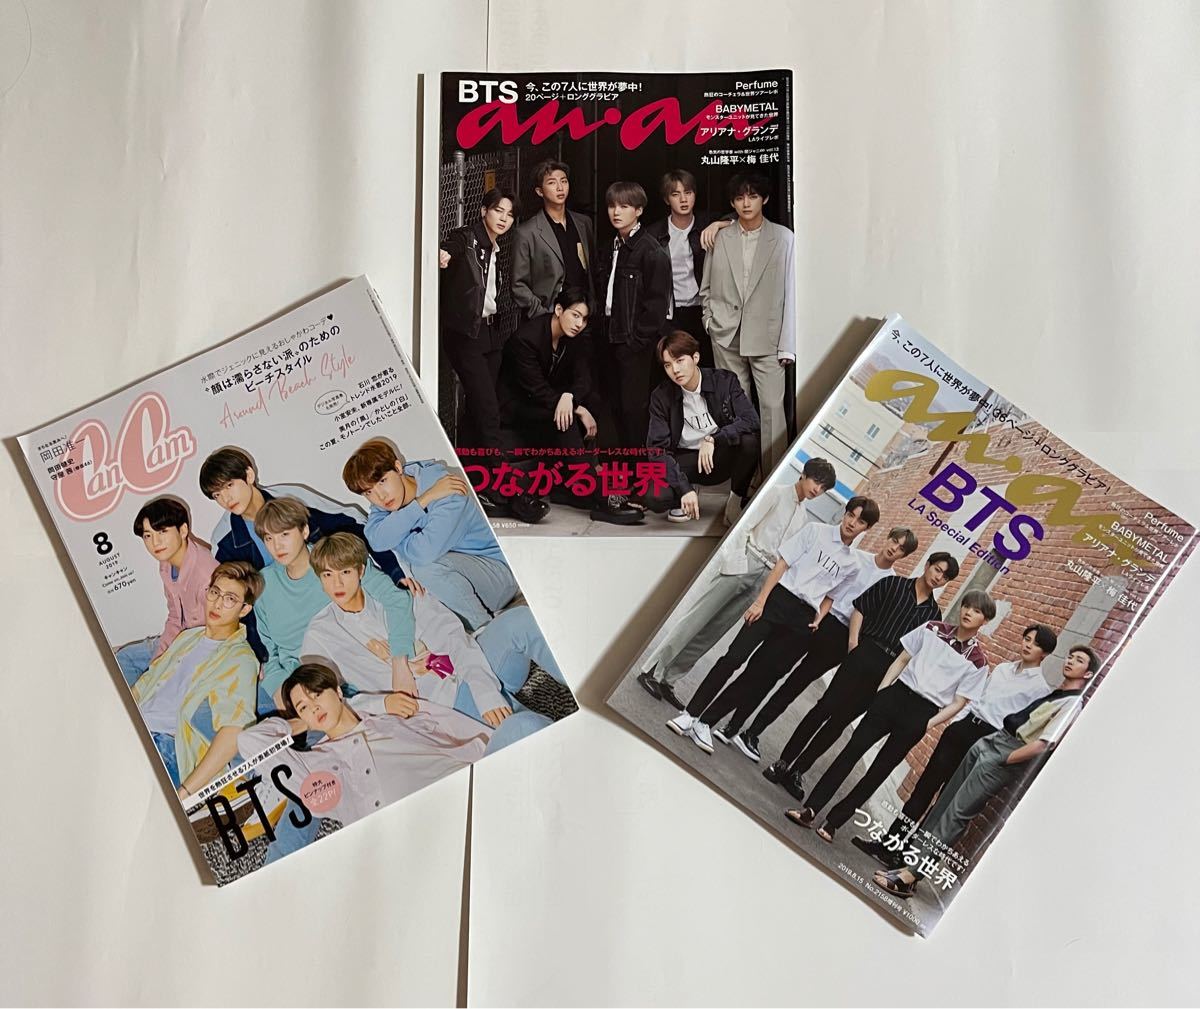 74%OFF!】 BTS anan can など雑誌7冊 confmax.com.br